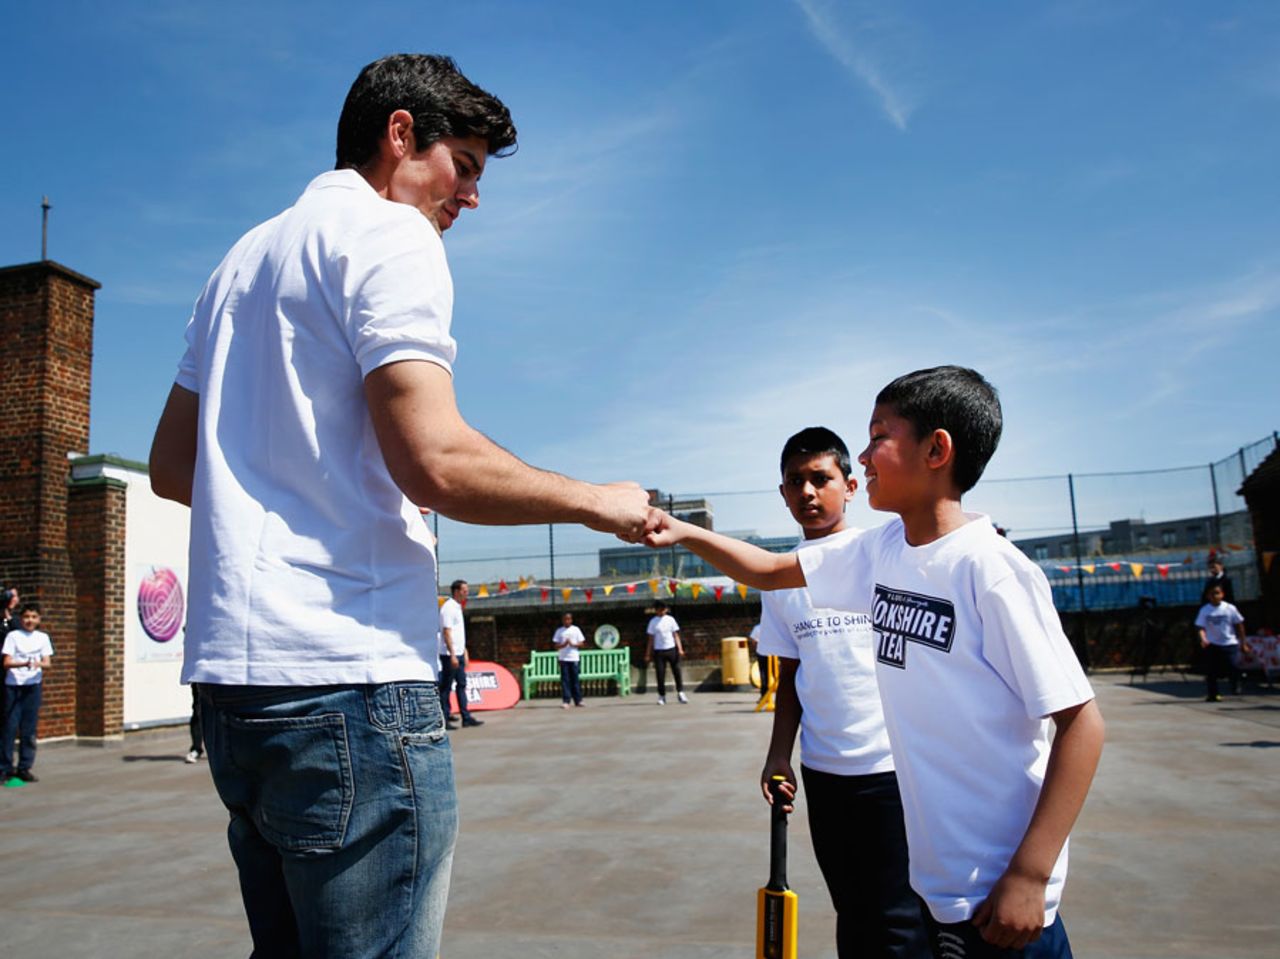 Alastair Cook gets a fist bump at a Chance to Shine event in Bethnal Green, London, May 5, 2016